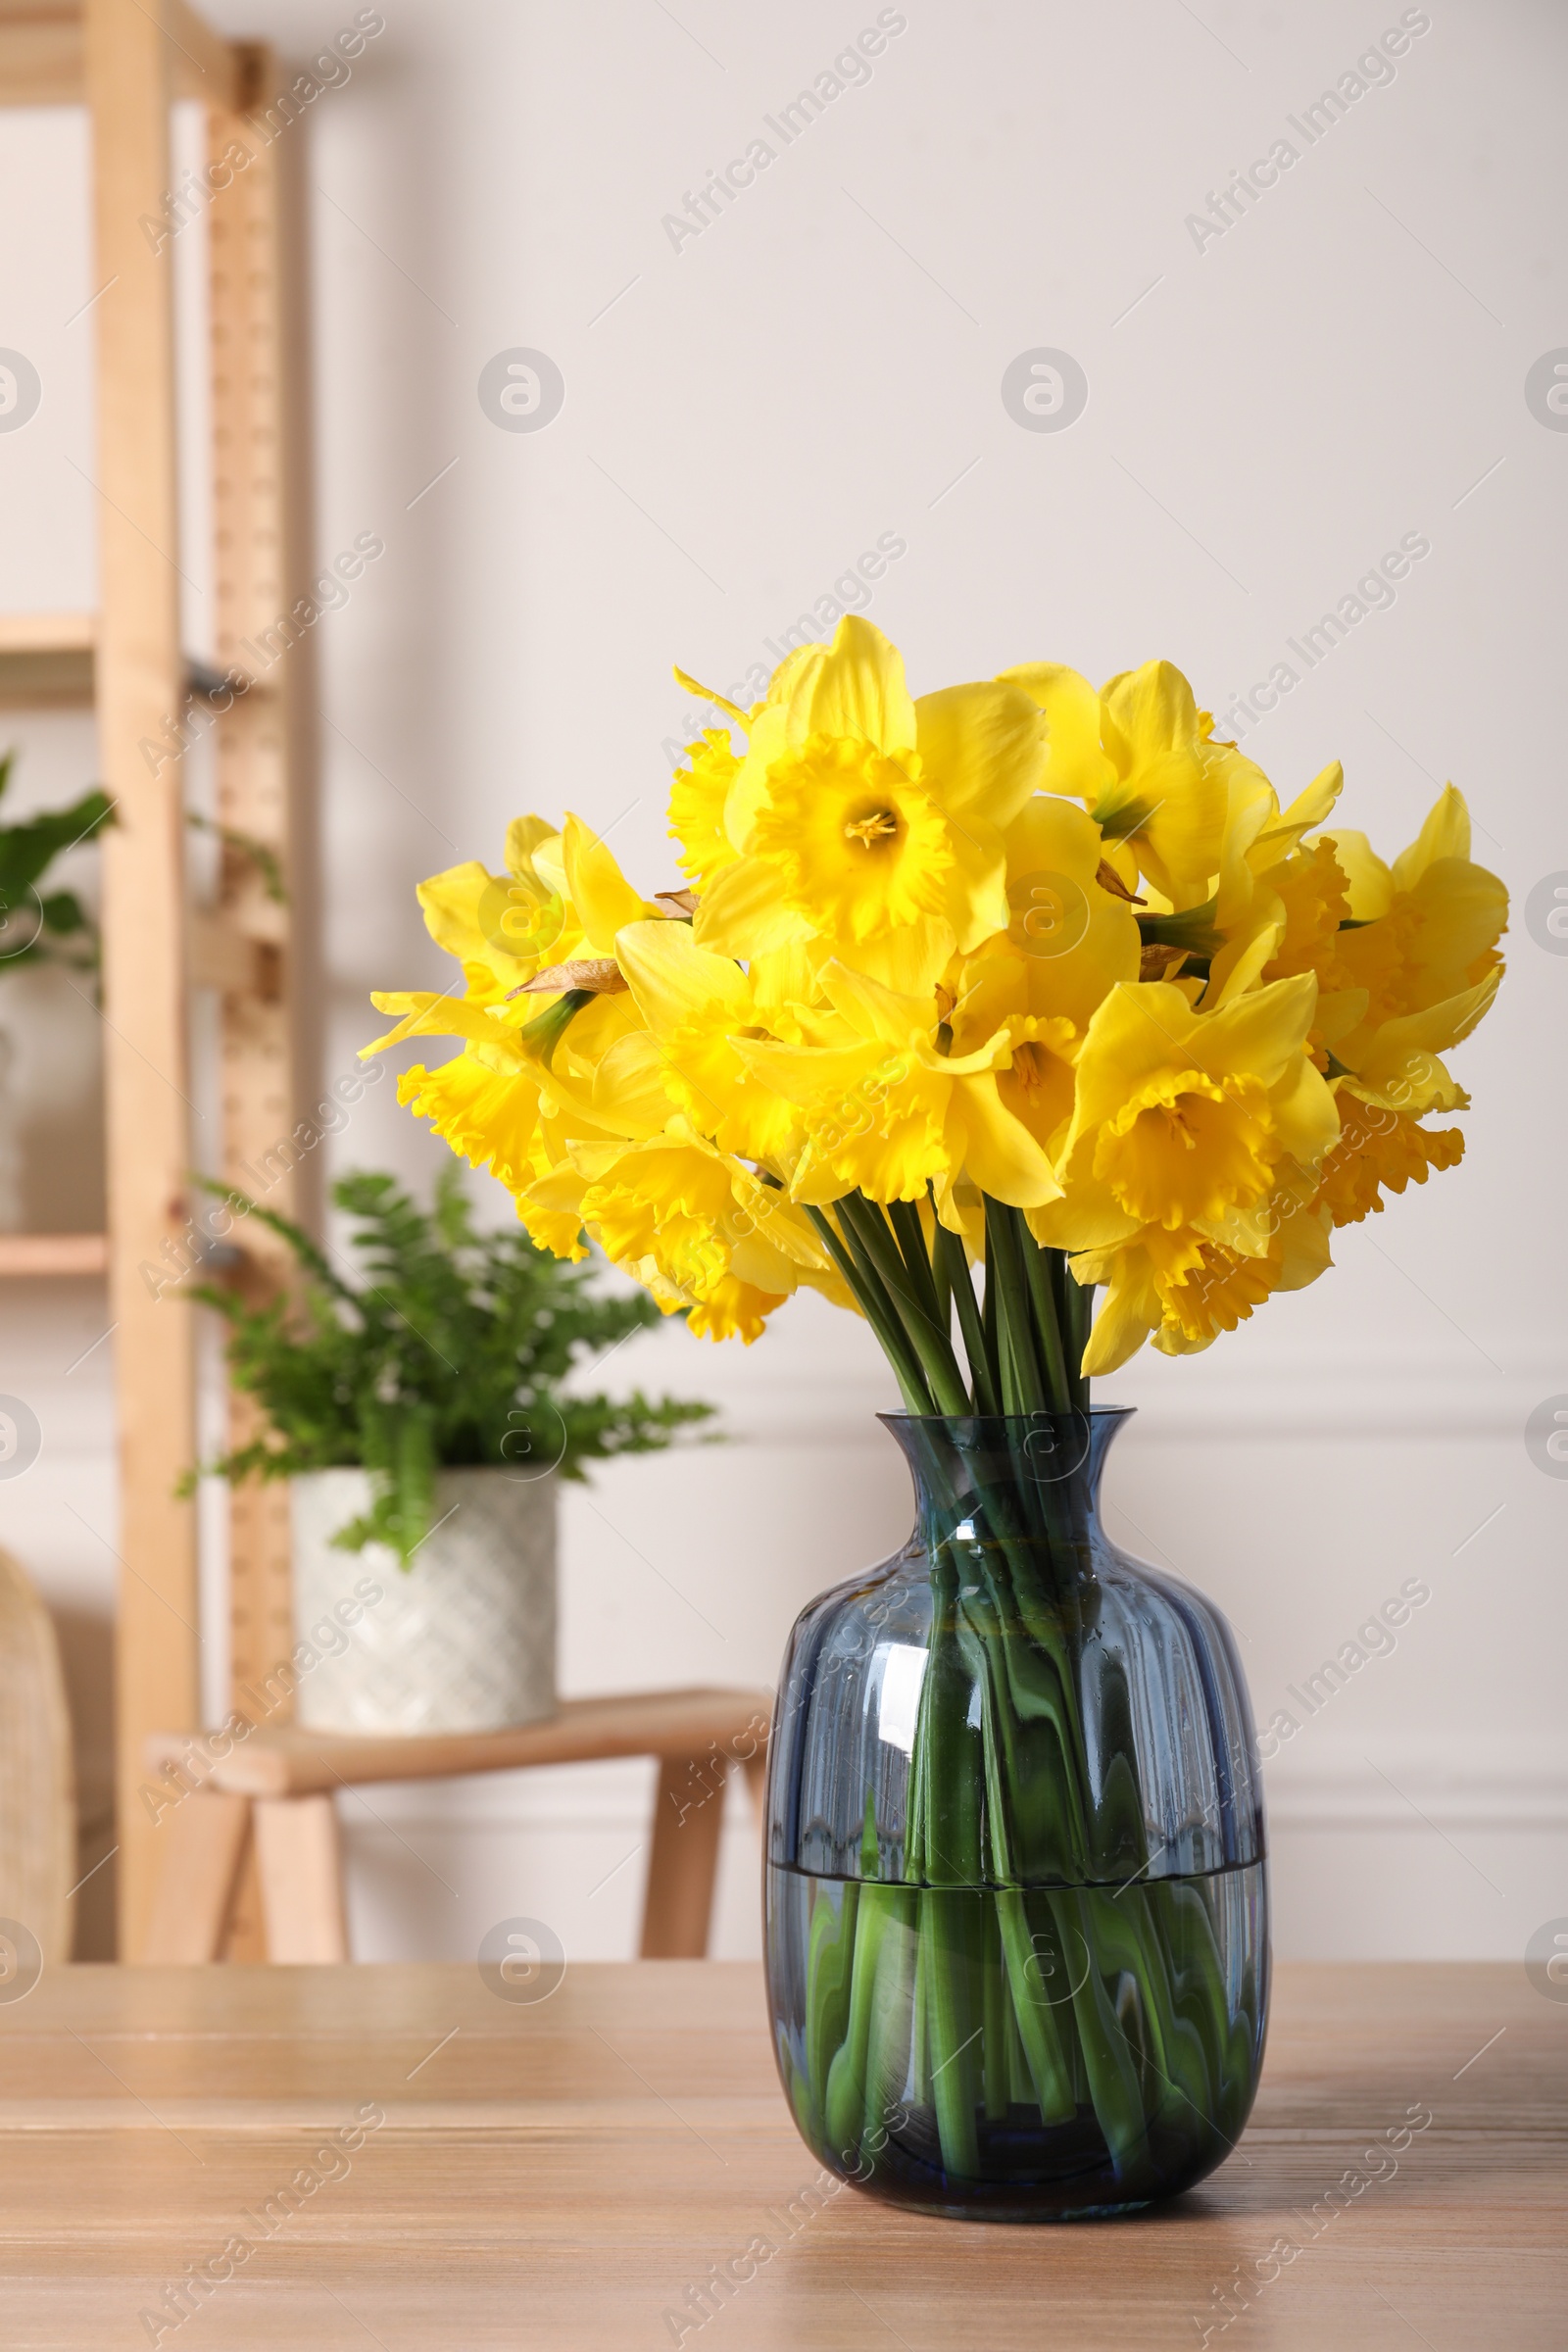 Photo of Beautiful daffodils in vase on wooden table indoors